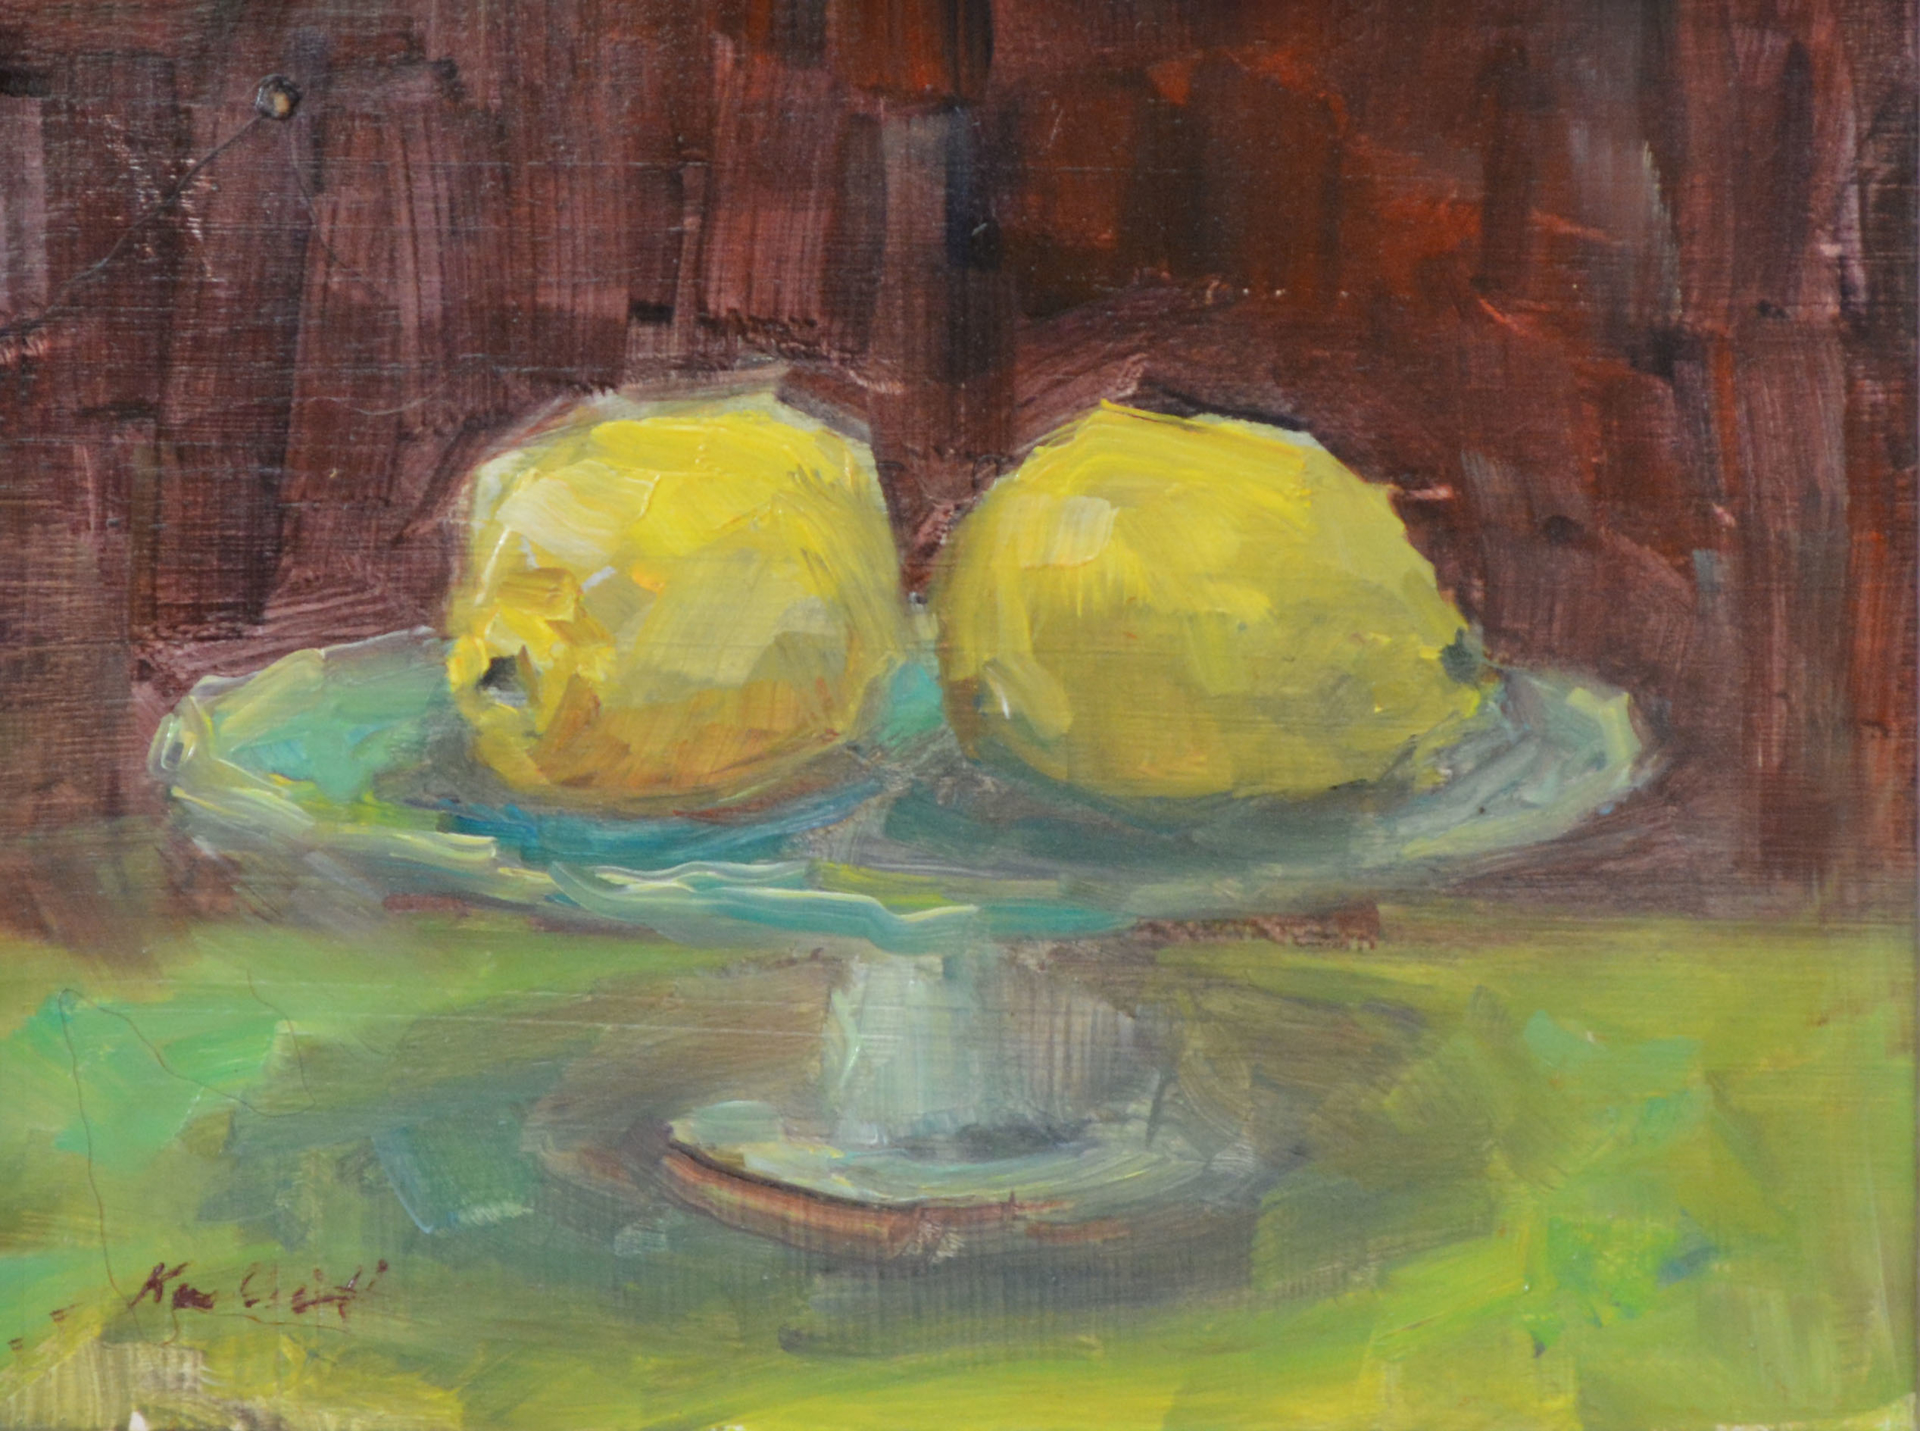 Two Lemons and a Cake Stand by Karen Hewitt Hagan